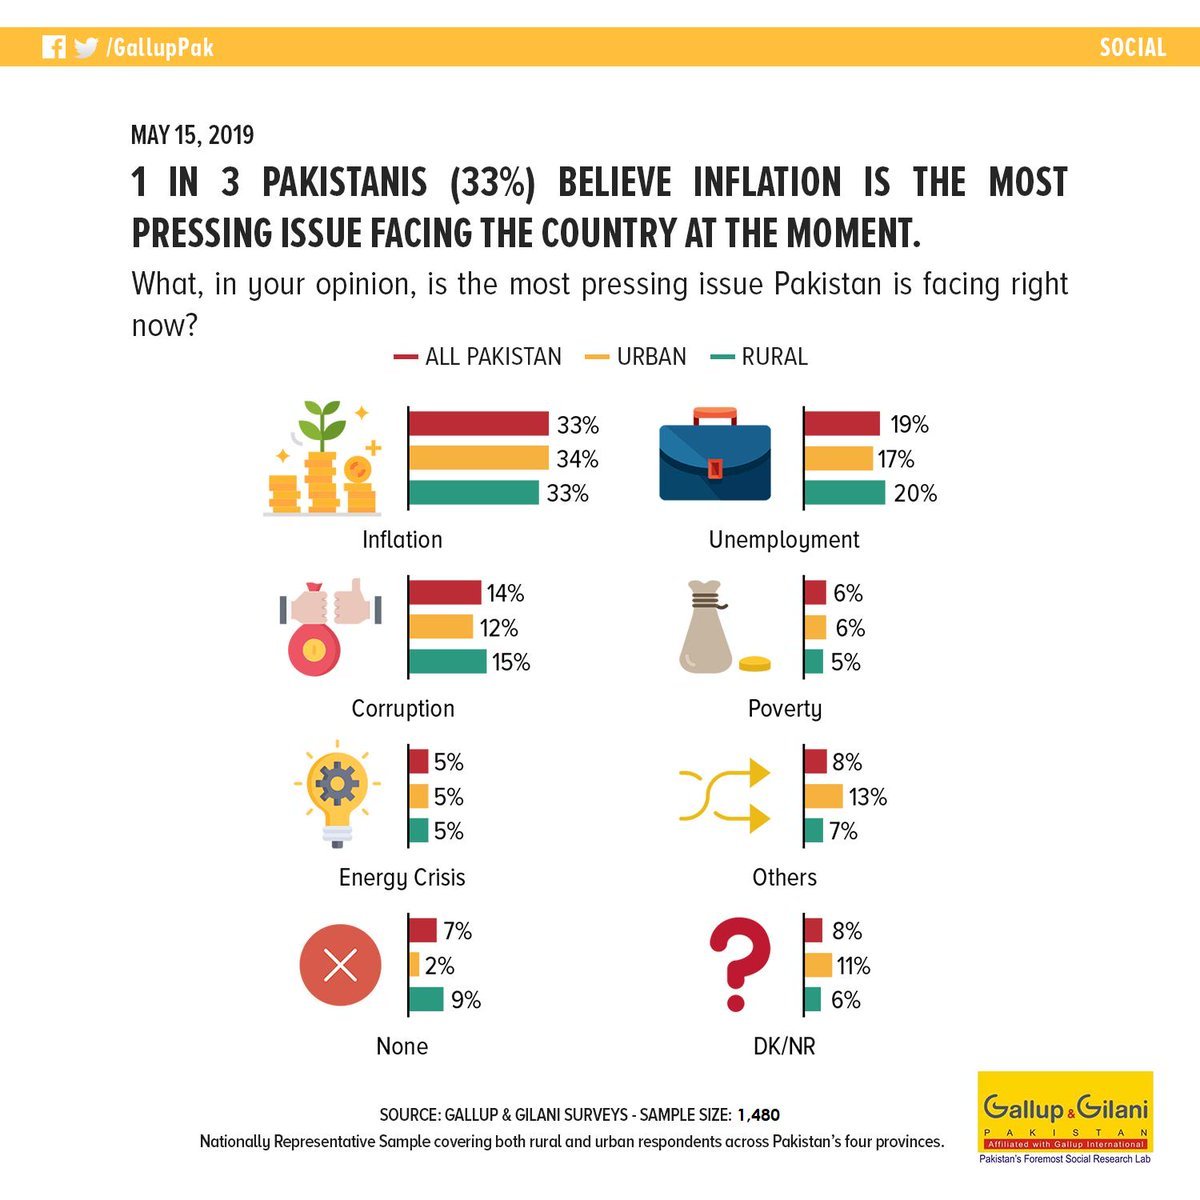 1 in 3 Pakistanis believe inflation is the most pressing issue facing country